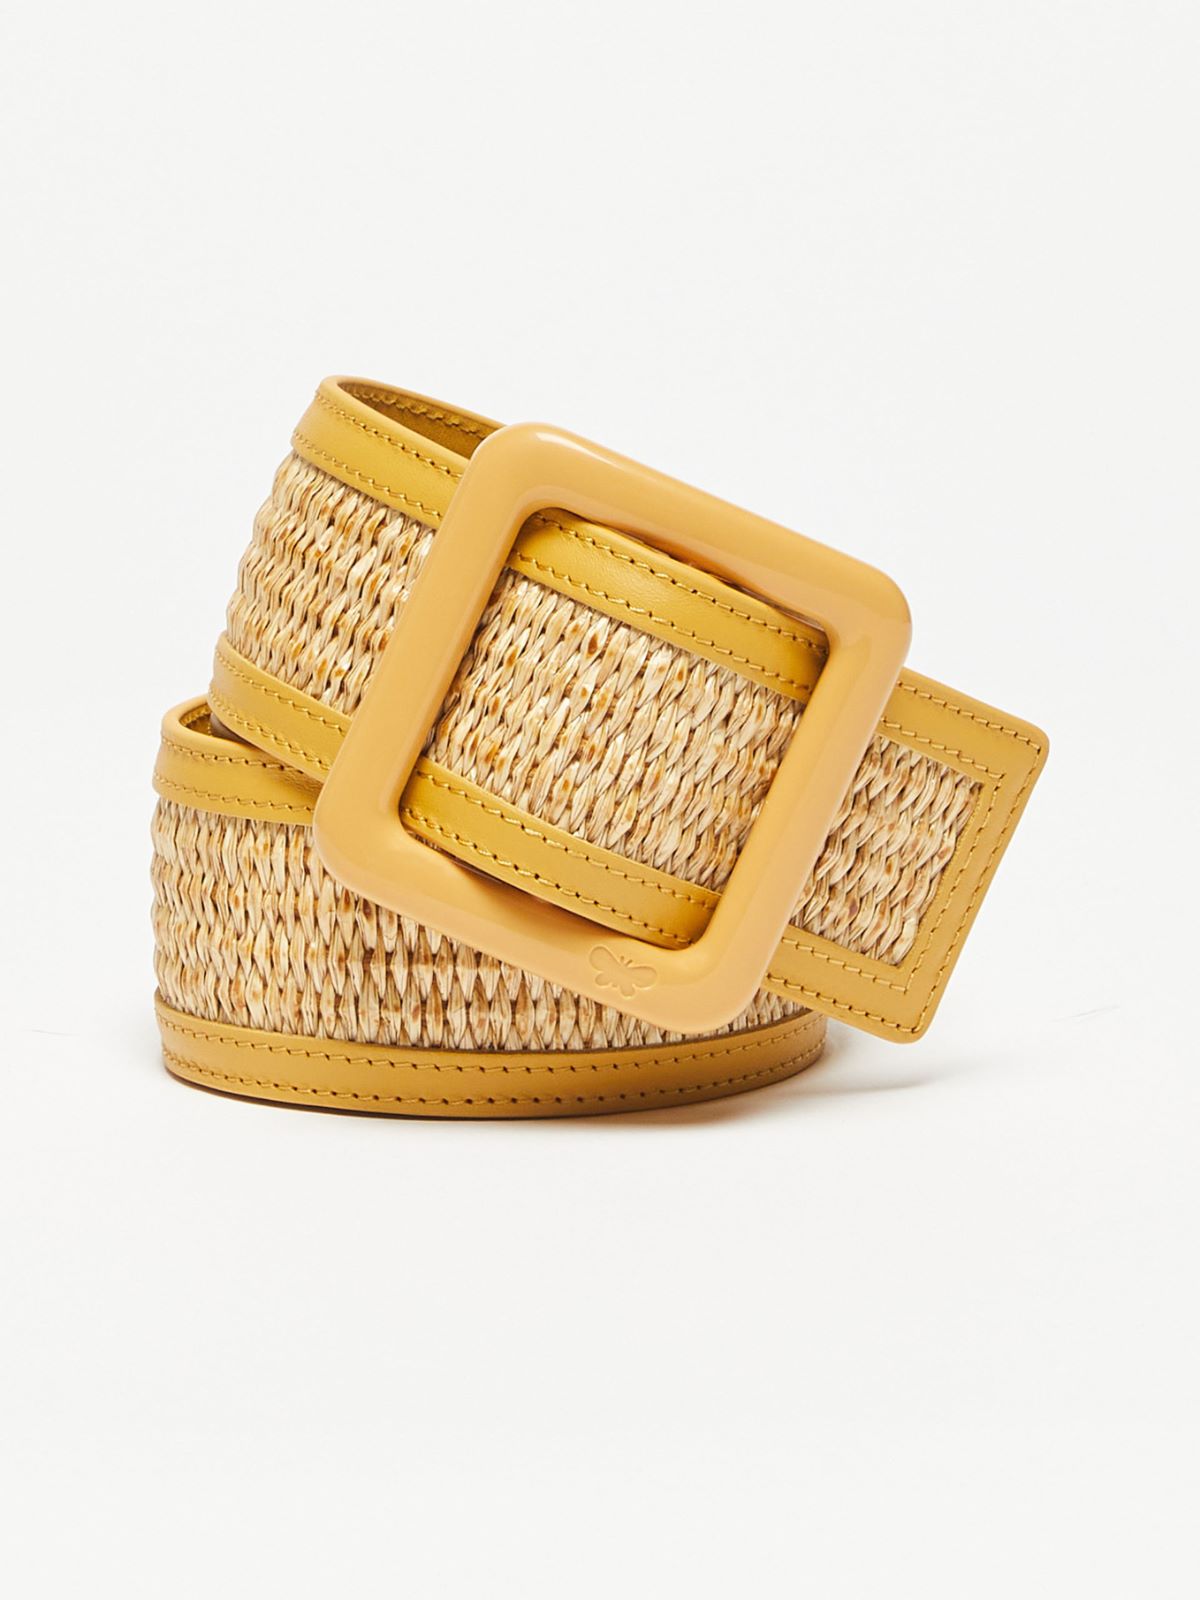 Cotton and leather belt - NATURAL - Weekend Max Mara